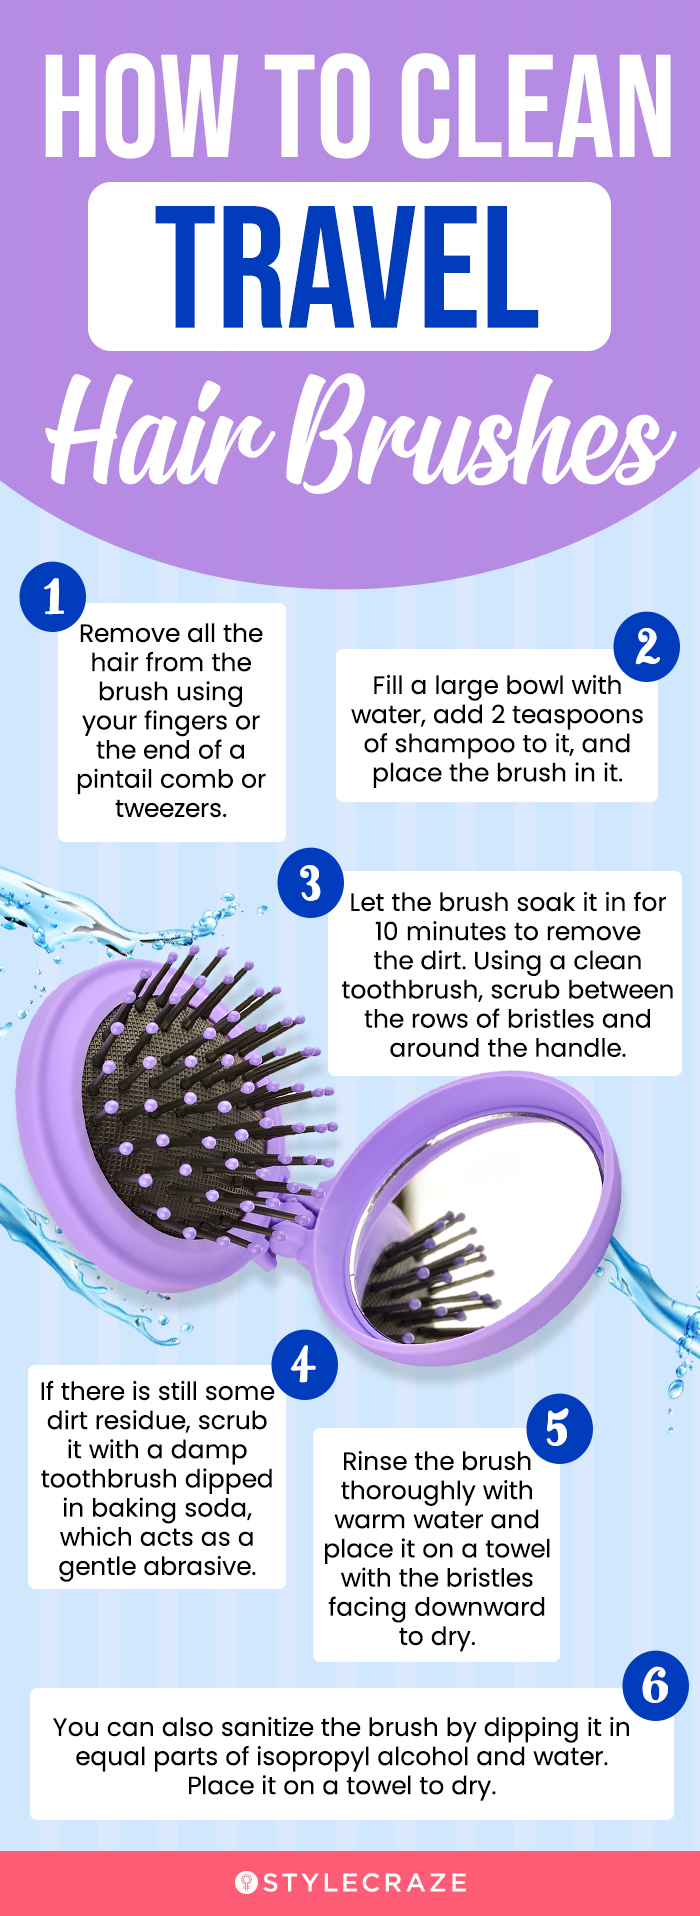 How To Clean Travel Hairbrushes (infographic)